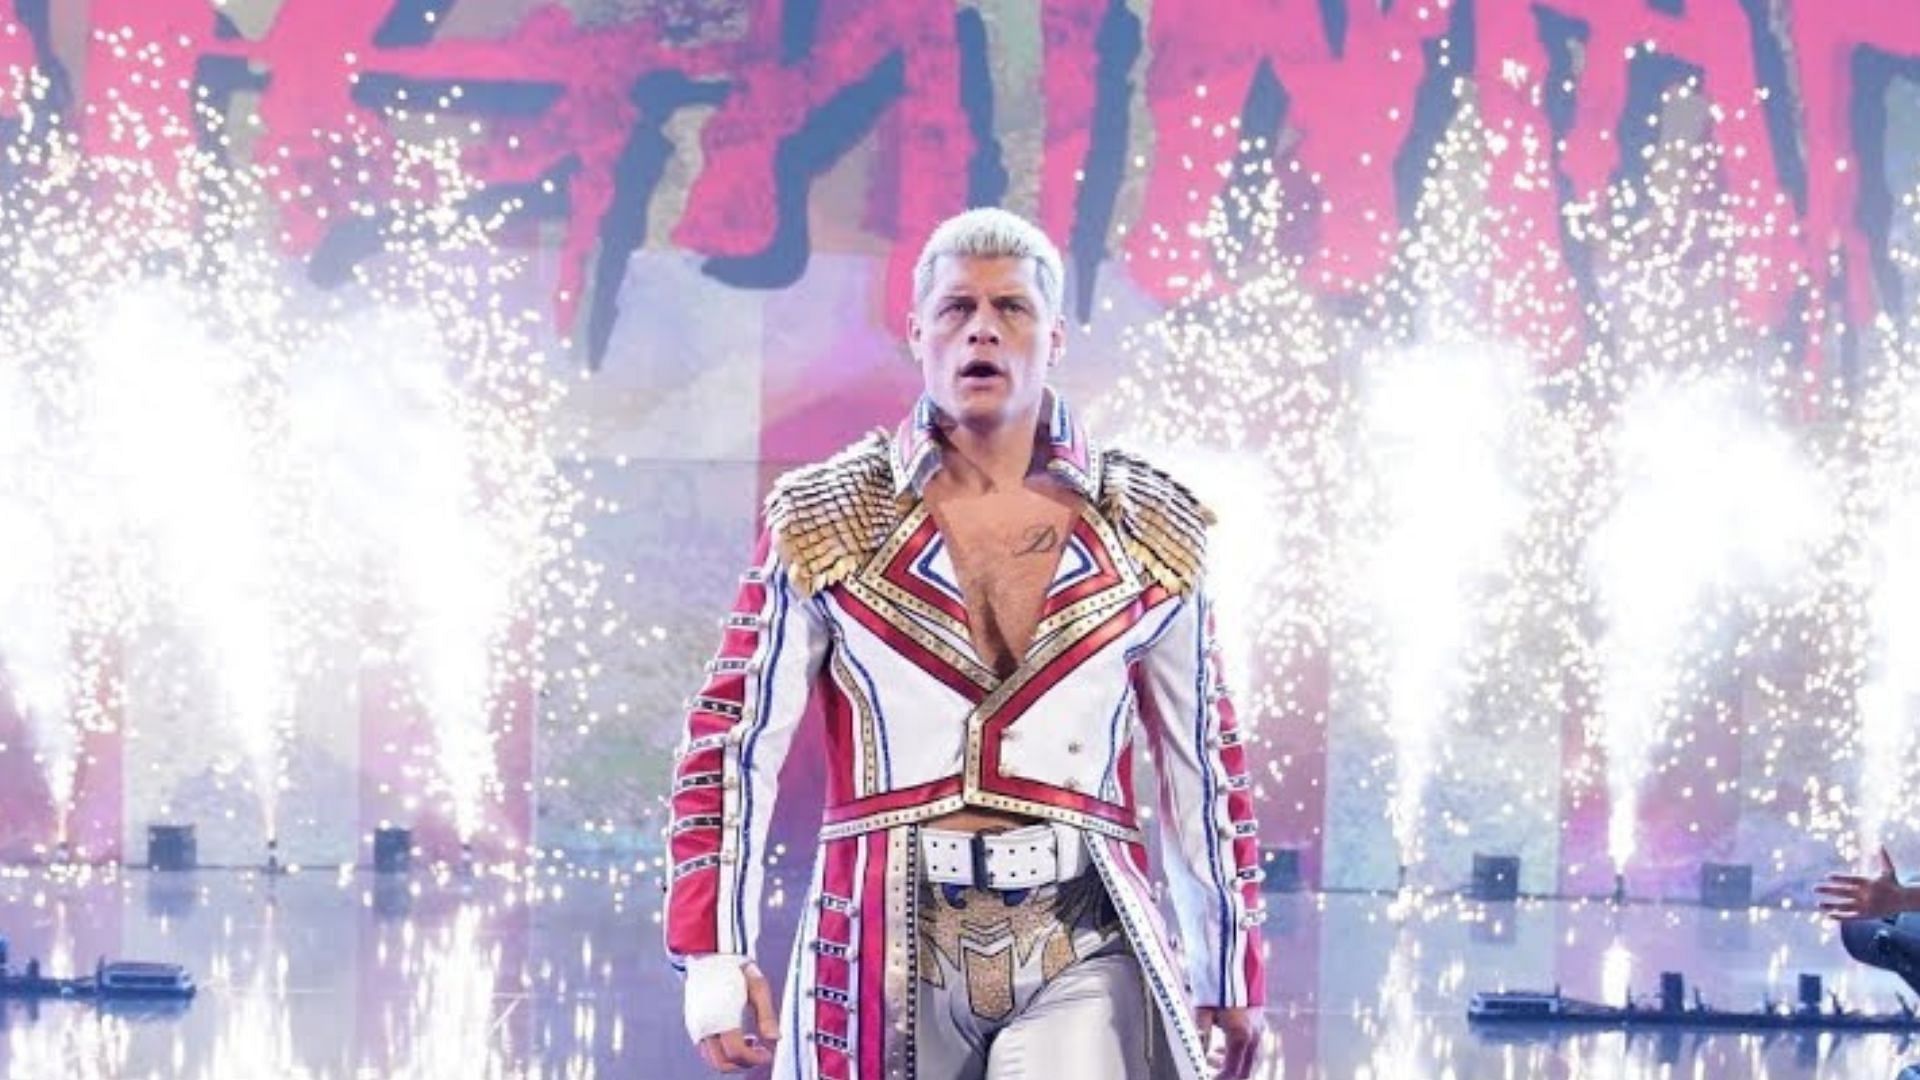 Cody Rhodes is one of the top stars in WWE.